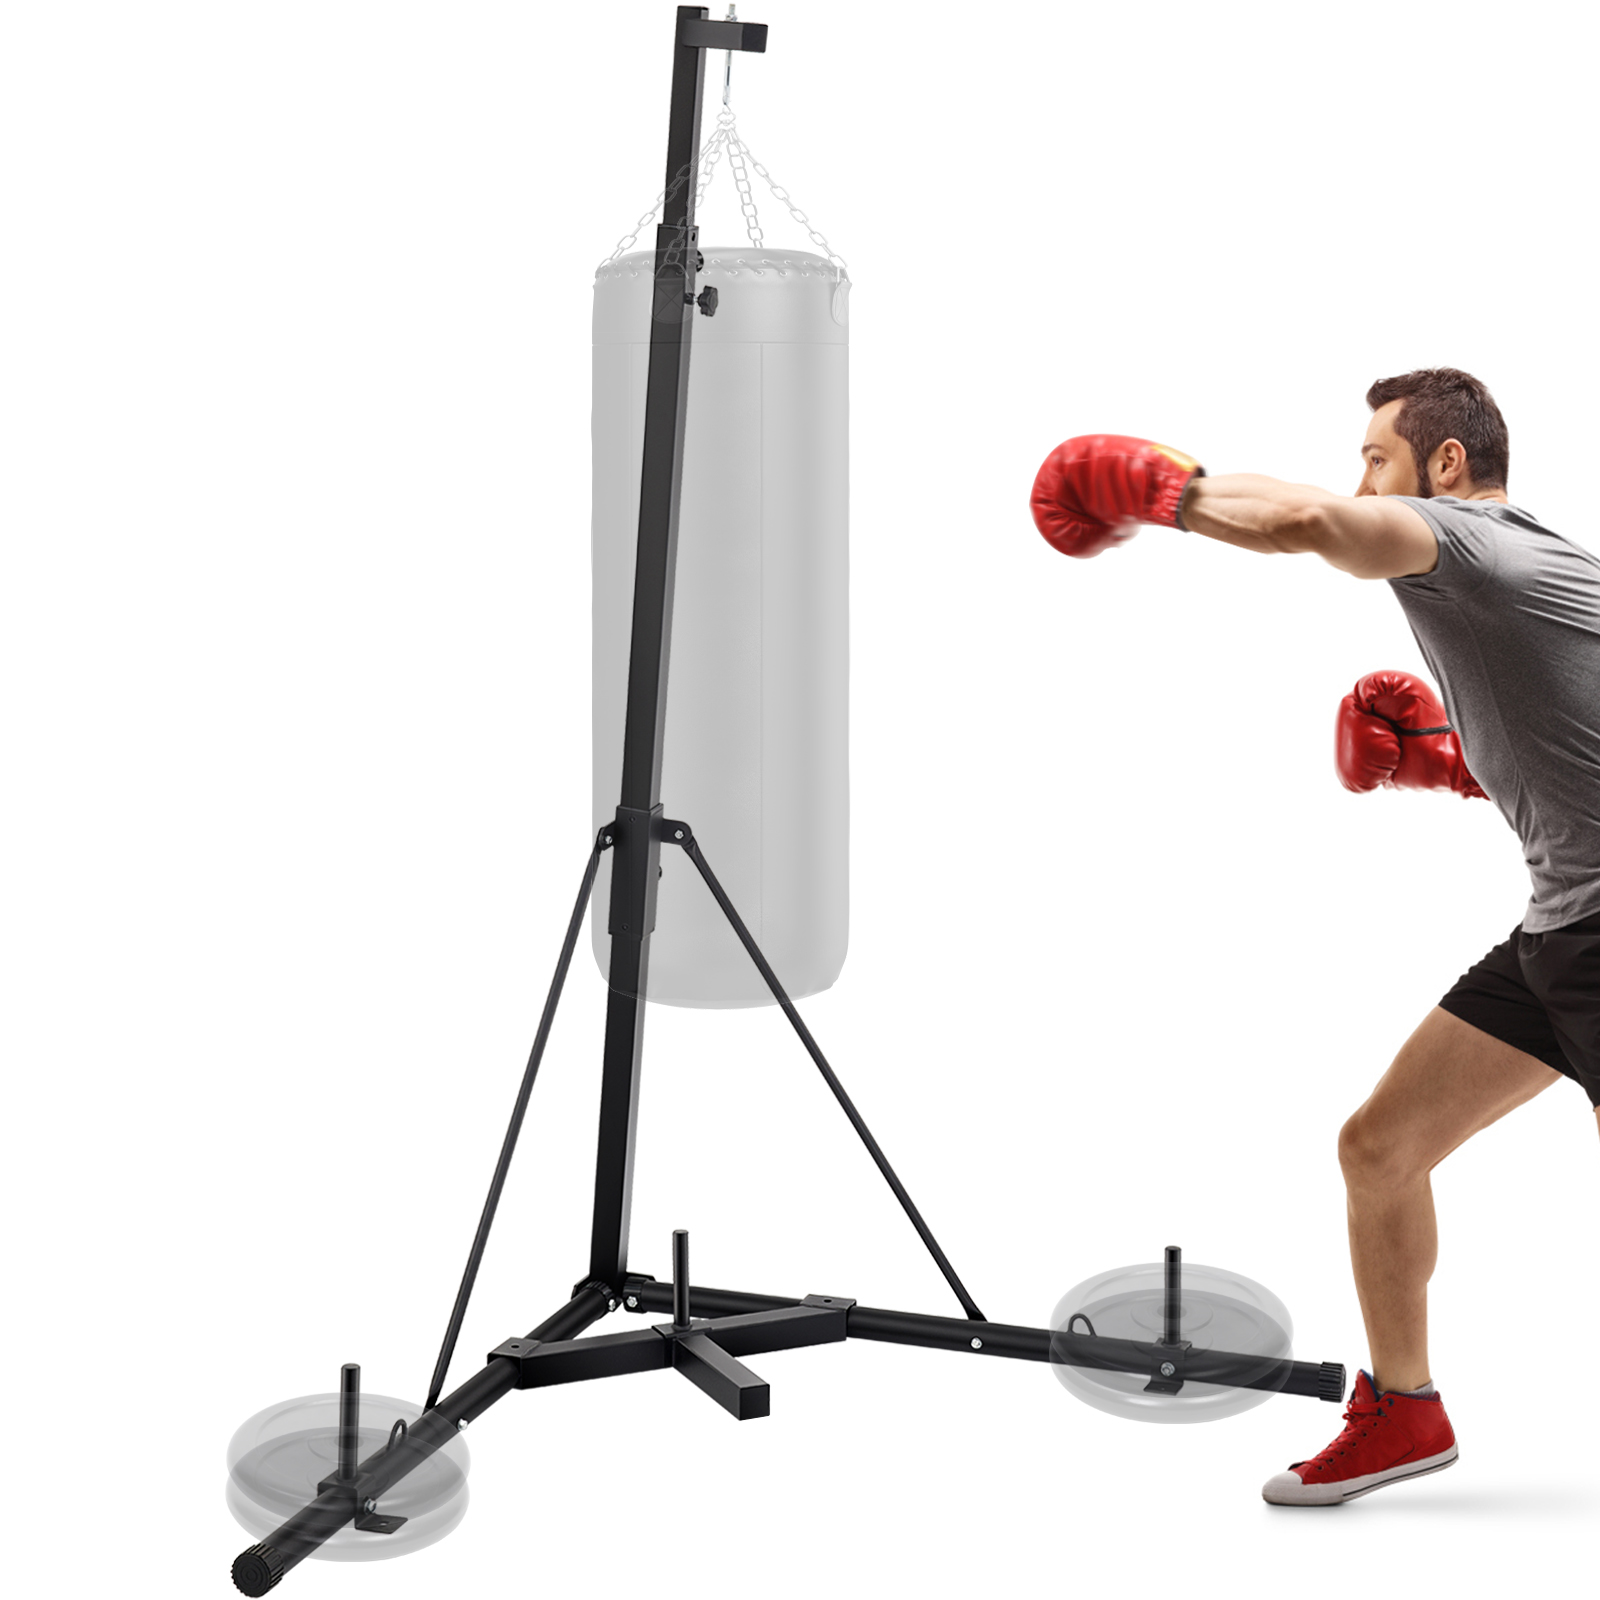 Foldable Boxing Bag Stand Free Standing Punching Punch Bracket Train от Vevor Many GEOs